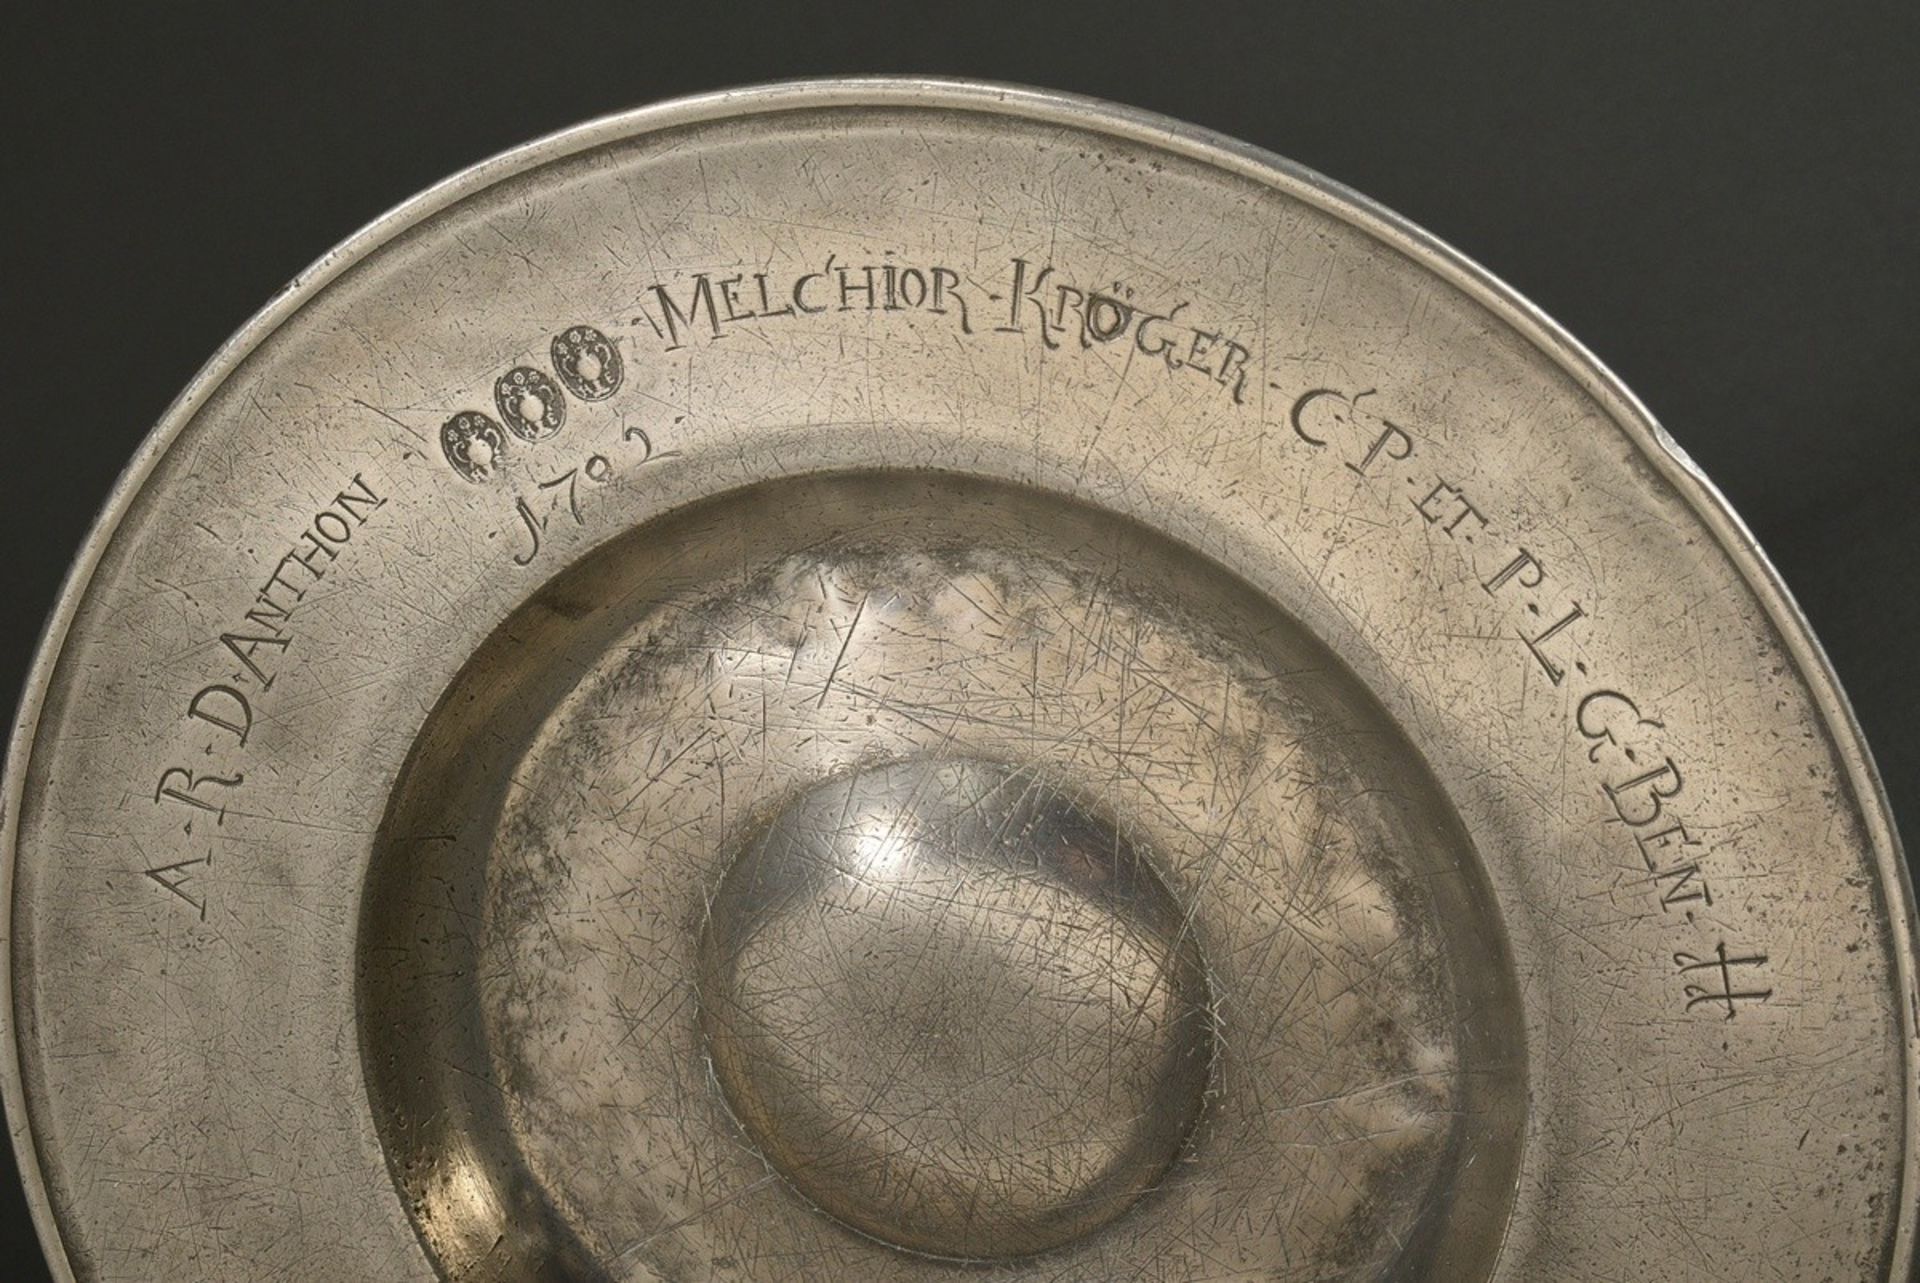 3 pewter wide rim plates with a humped centre, each dated and marked on the rim "A.R.D. Anthon Melc - Image 6 of 8